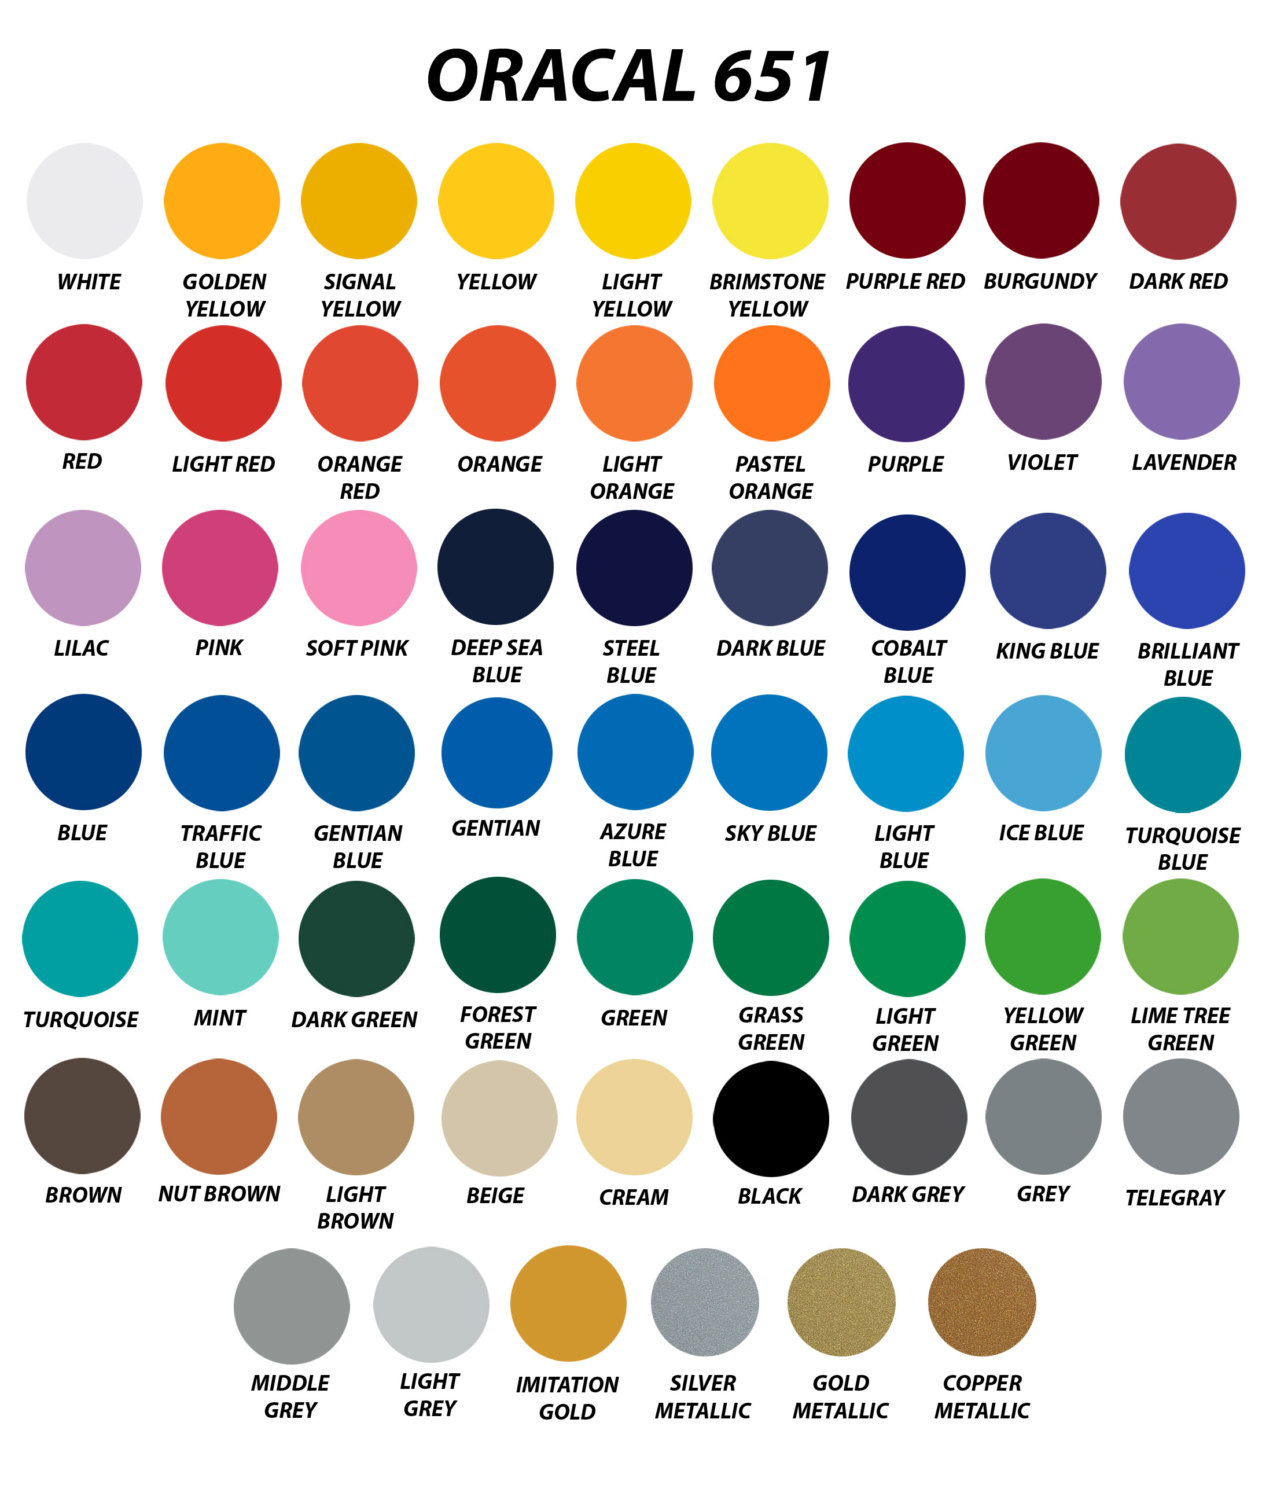 oracal 651 colors